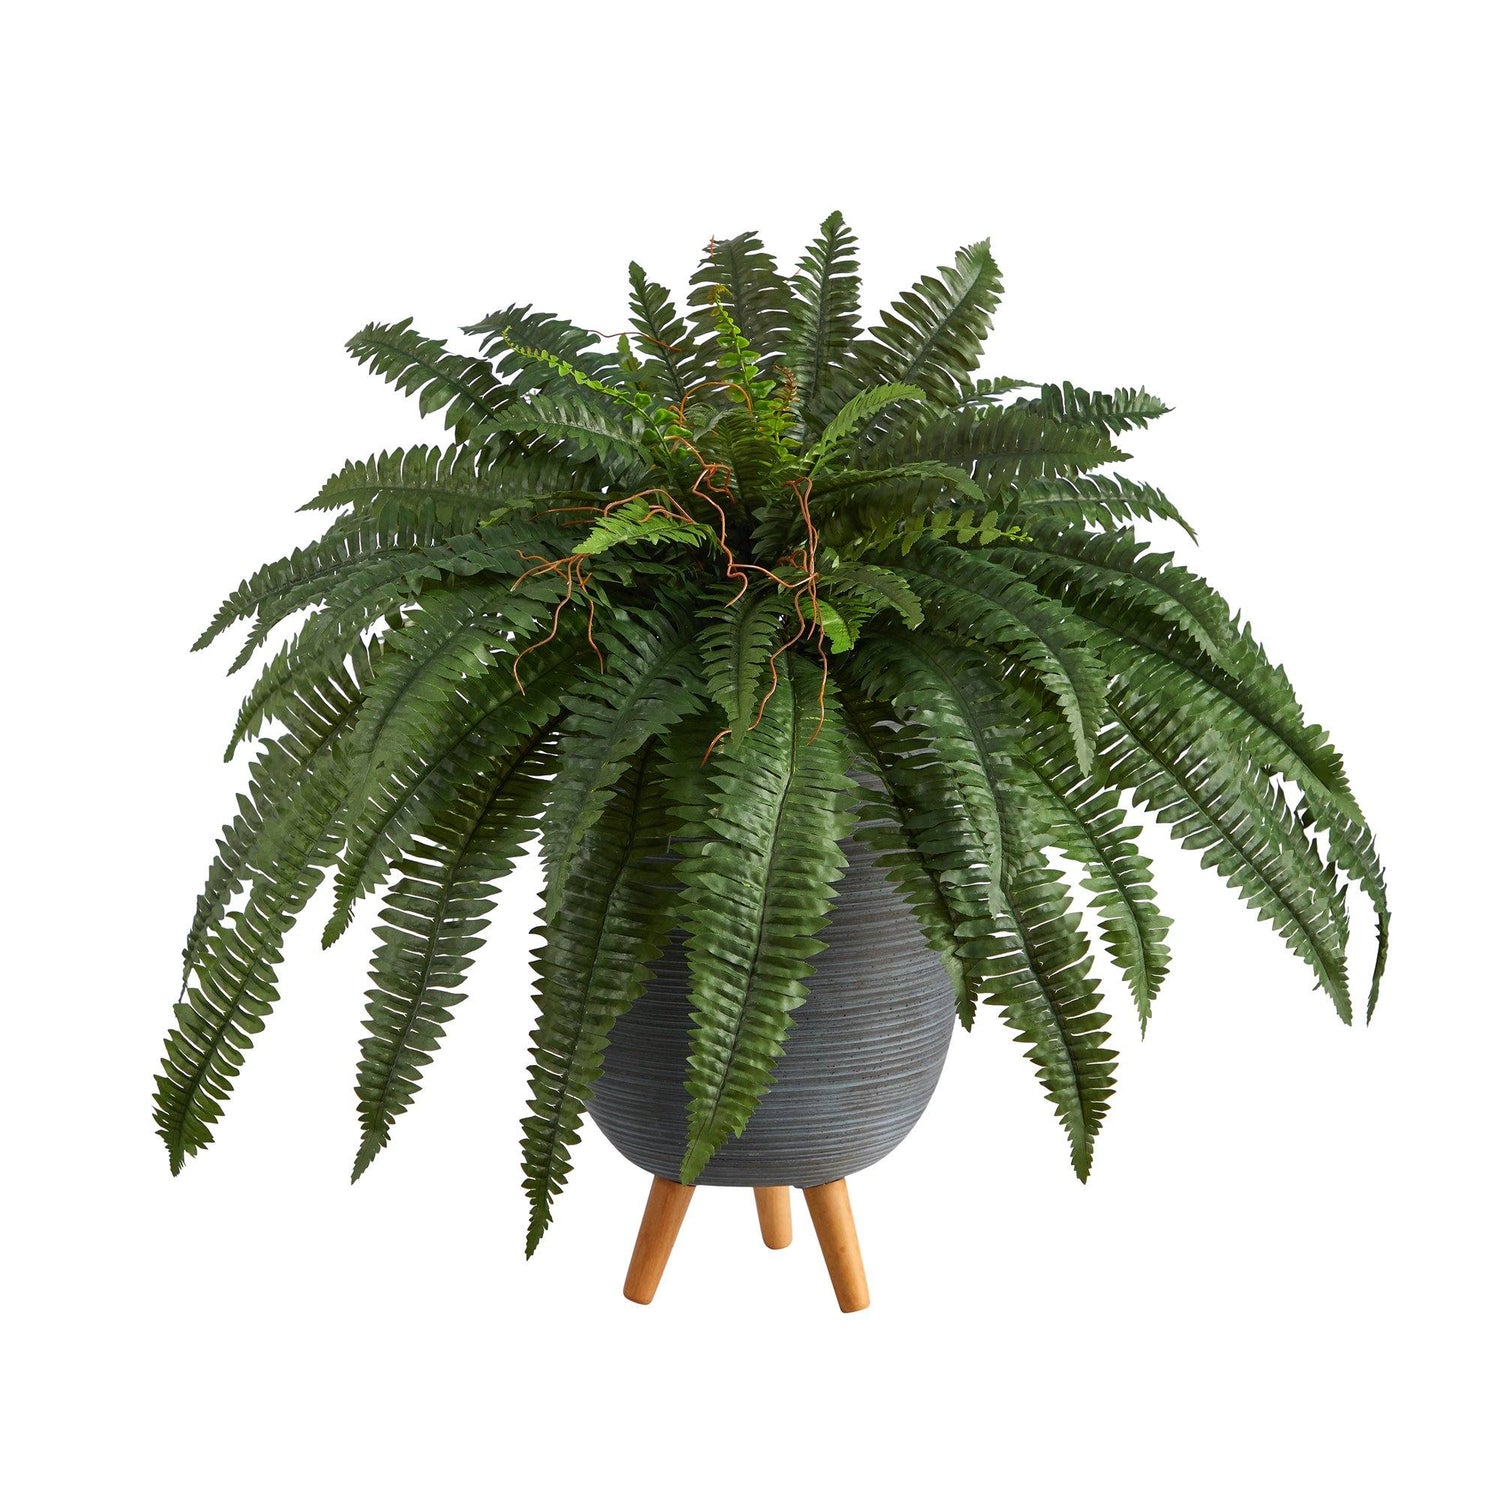 2.5’ Boston Fern Artificial Plant in Gray Planter with Stand